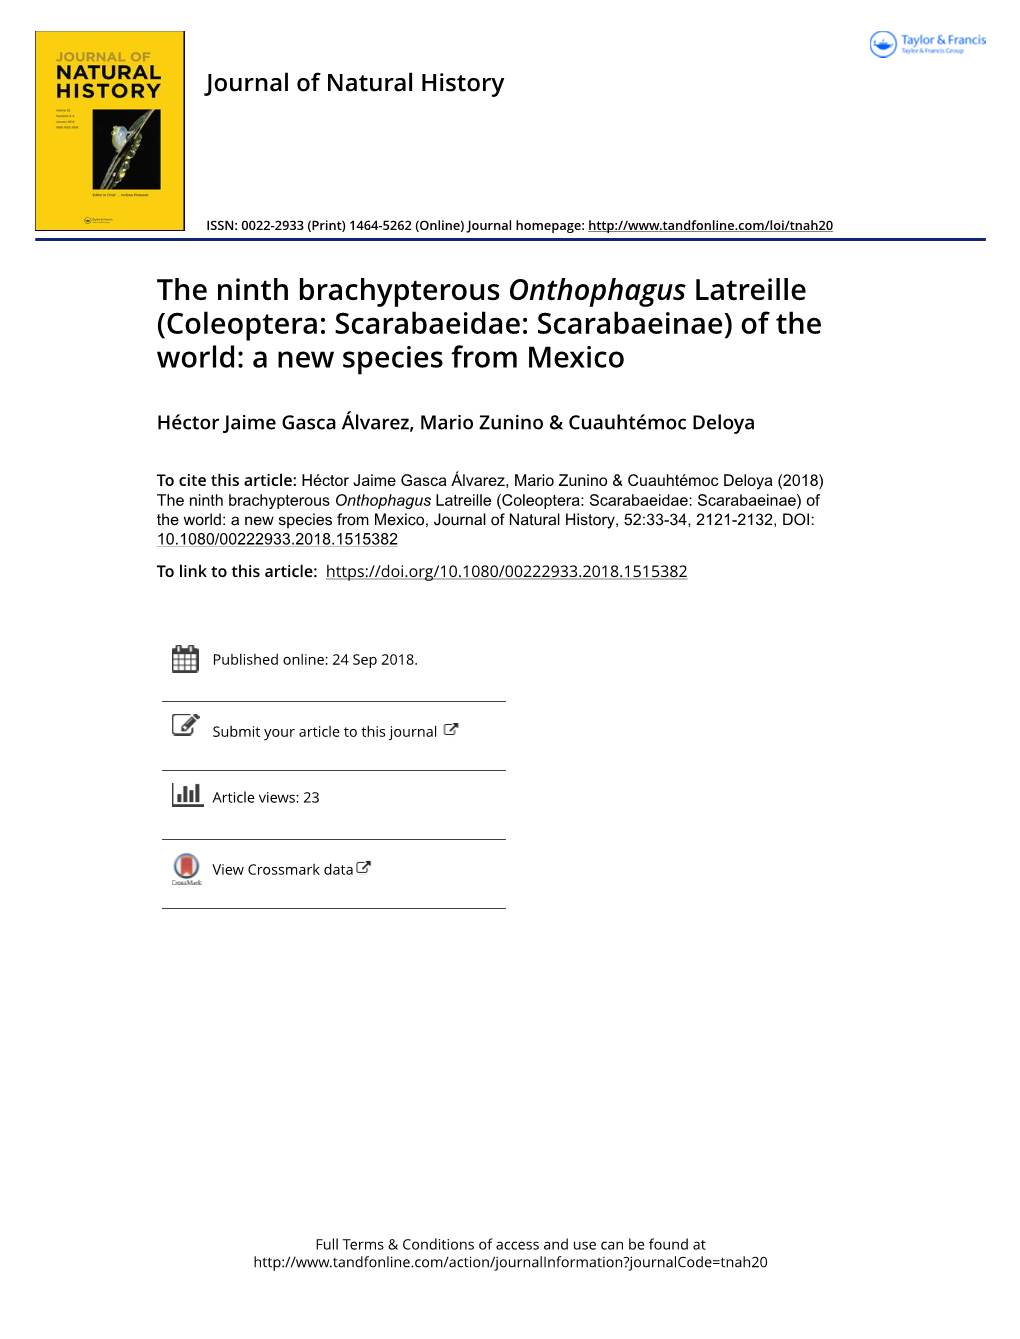 The Ninth Brachypterous Onthophagus Latreille (Coleoptera: Scarabaeidae: Scarabaeinae) of the World: a New Species from Mexico